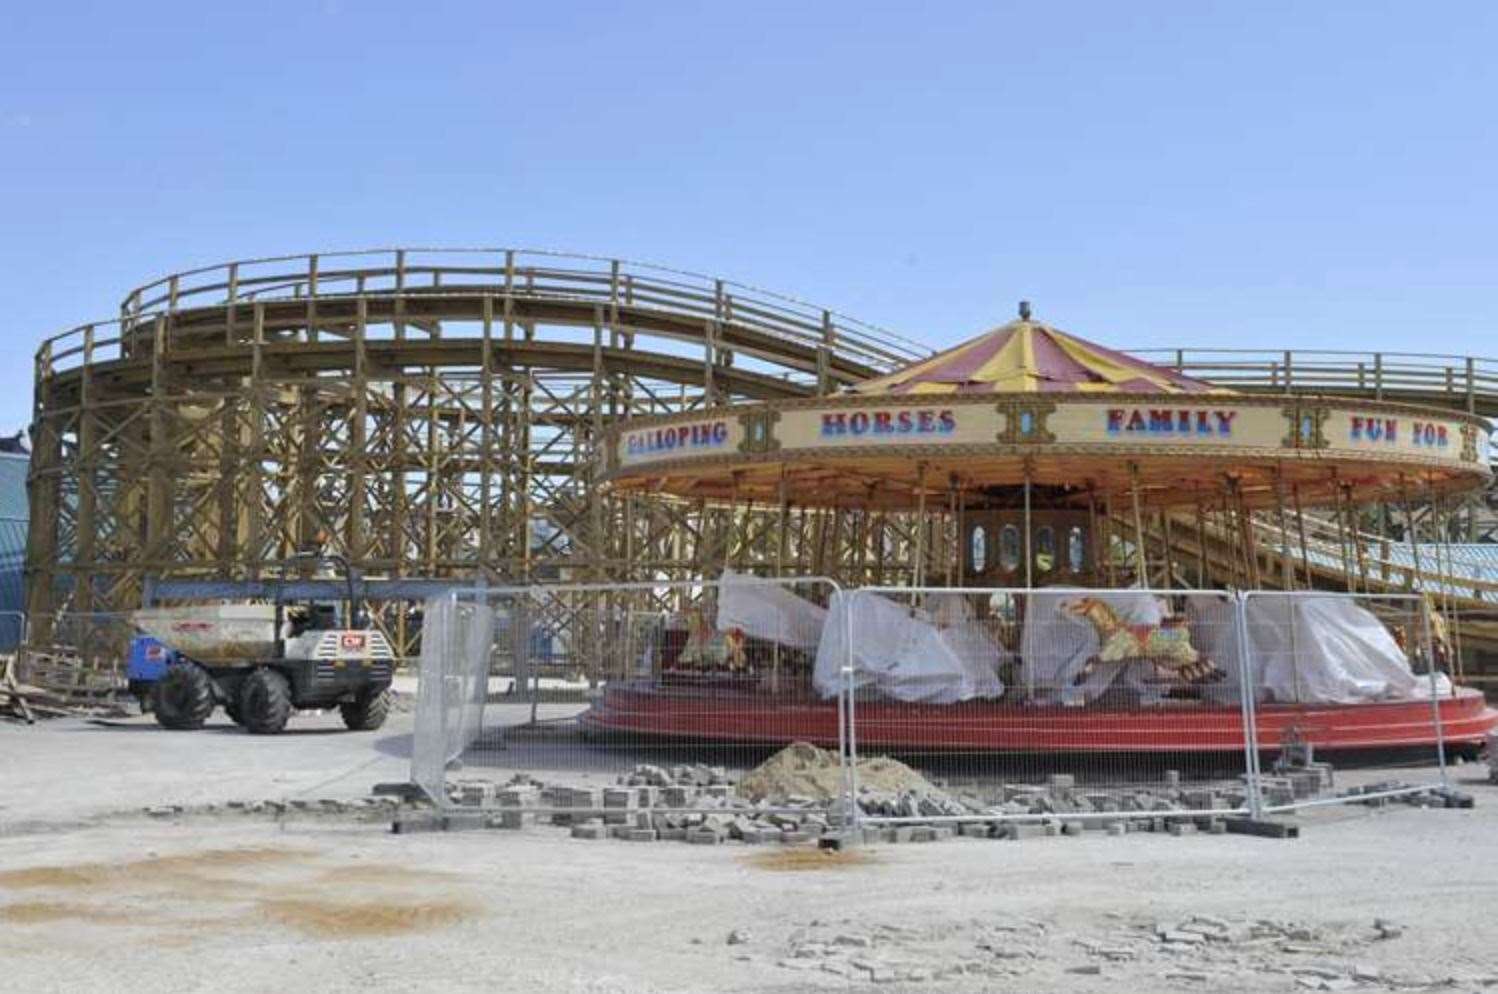 During the renovation of Dreamland.